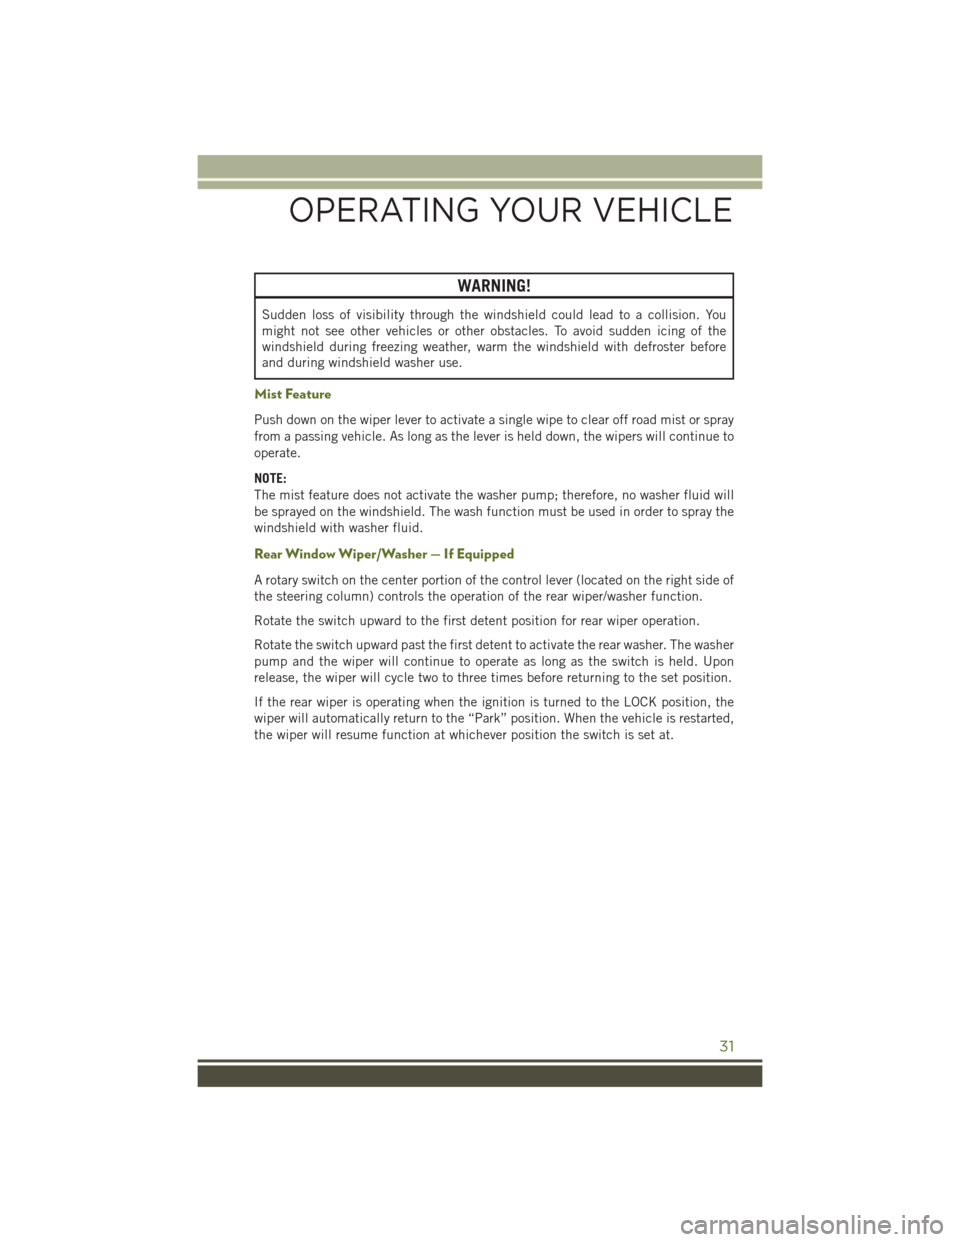 JEEP WRANGLER 2016 JK / 3.G User Guide WARNING!
Sudden loss of visibility through the windshield could lead to a collision. You
might not see other vehicles or other obstacles. To avoid sudden icing of the
windshield during freezing weathe